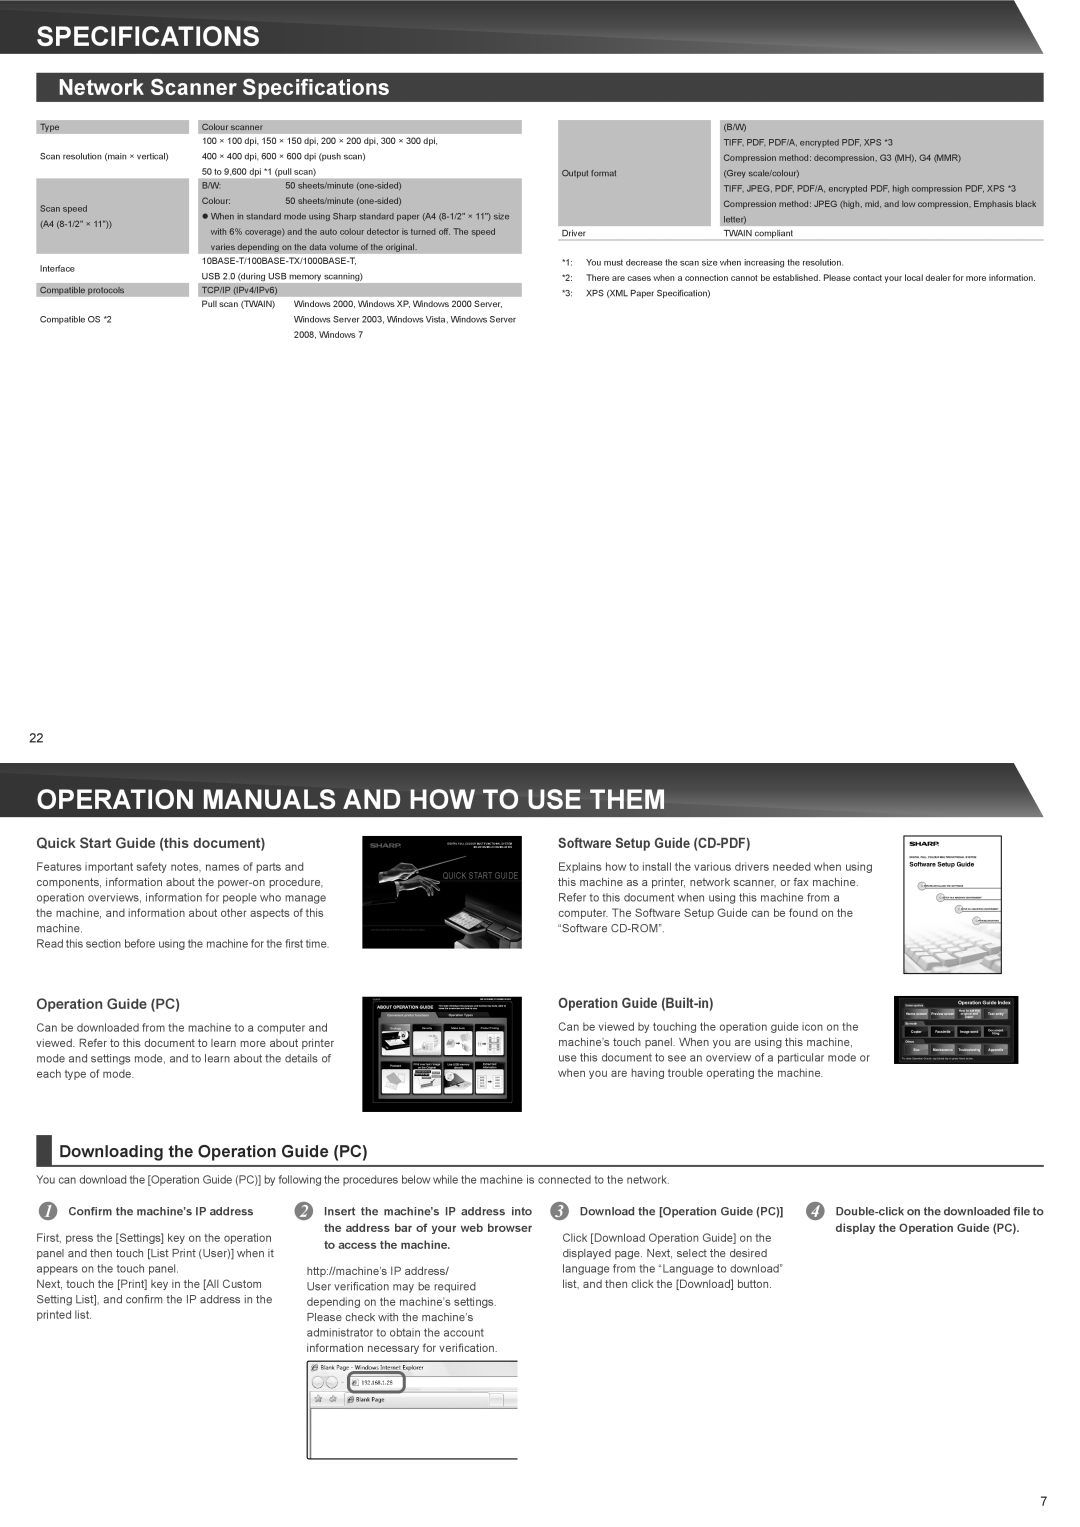 Sharp MX-2610N Operation Manuals And How To Use Them, Network Scanner Specifications, Quick Start Guide this document 